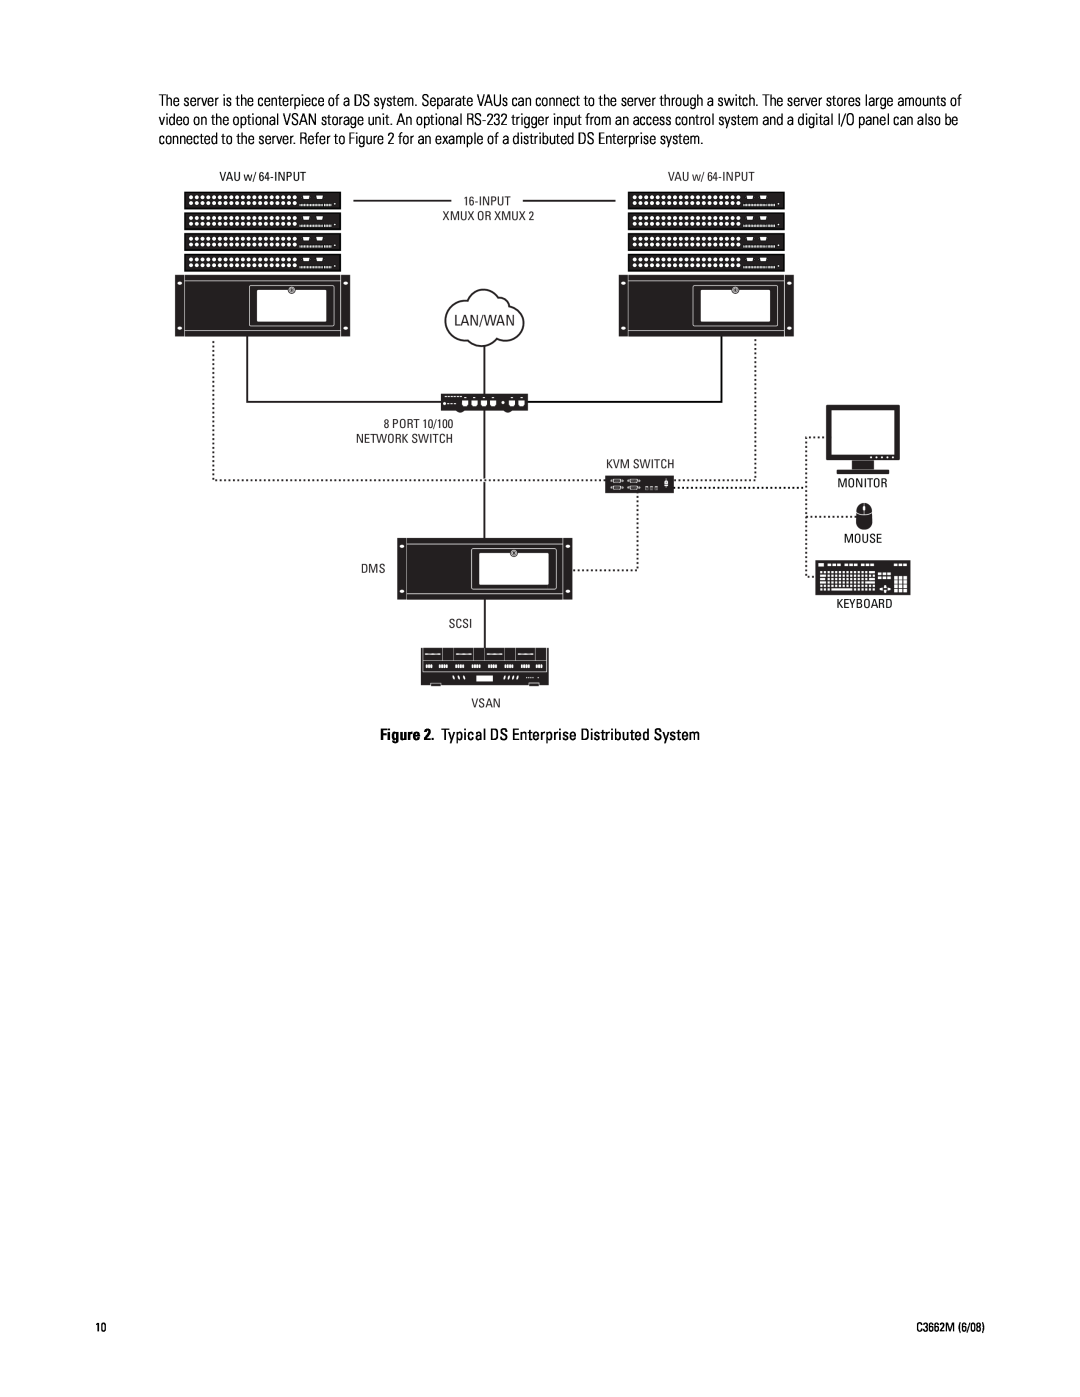 Pelco C3662M installation manual Typical DS Enterprise Distributed System, Lan/Wan 